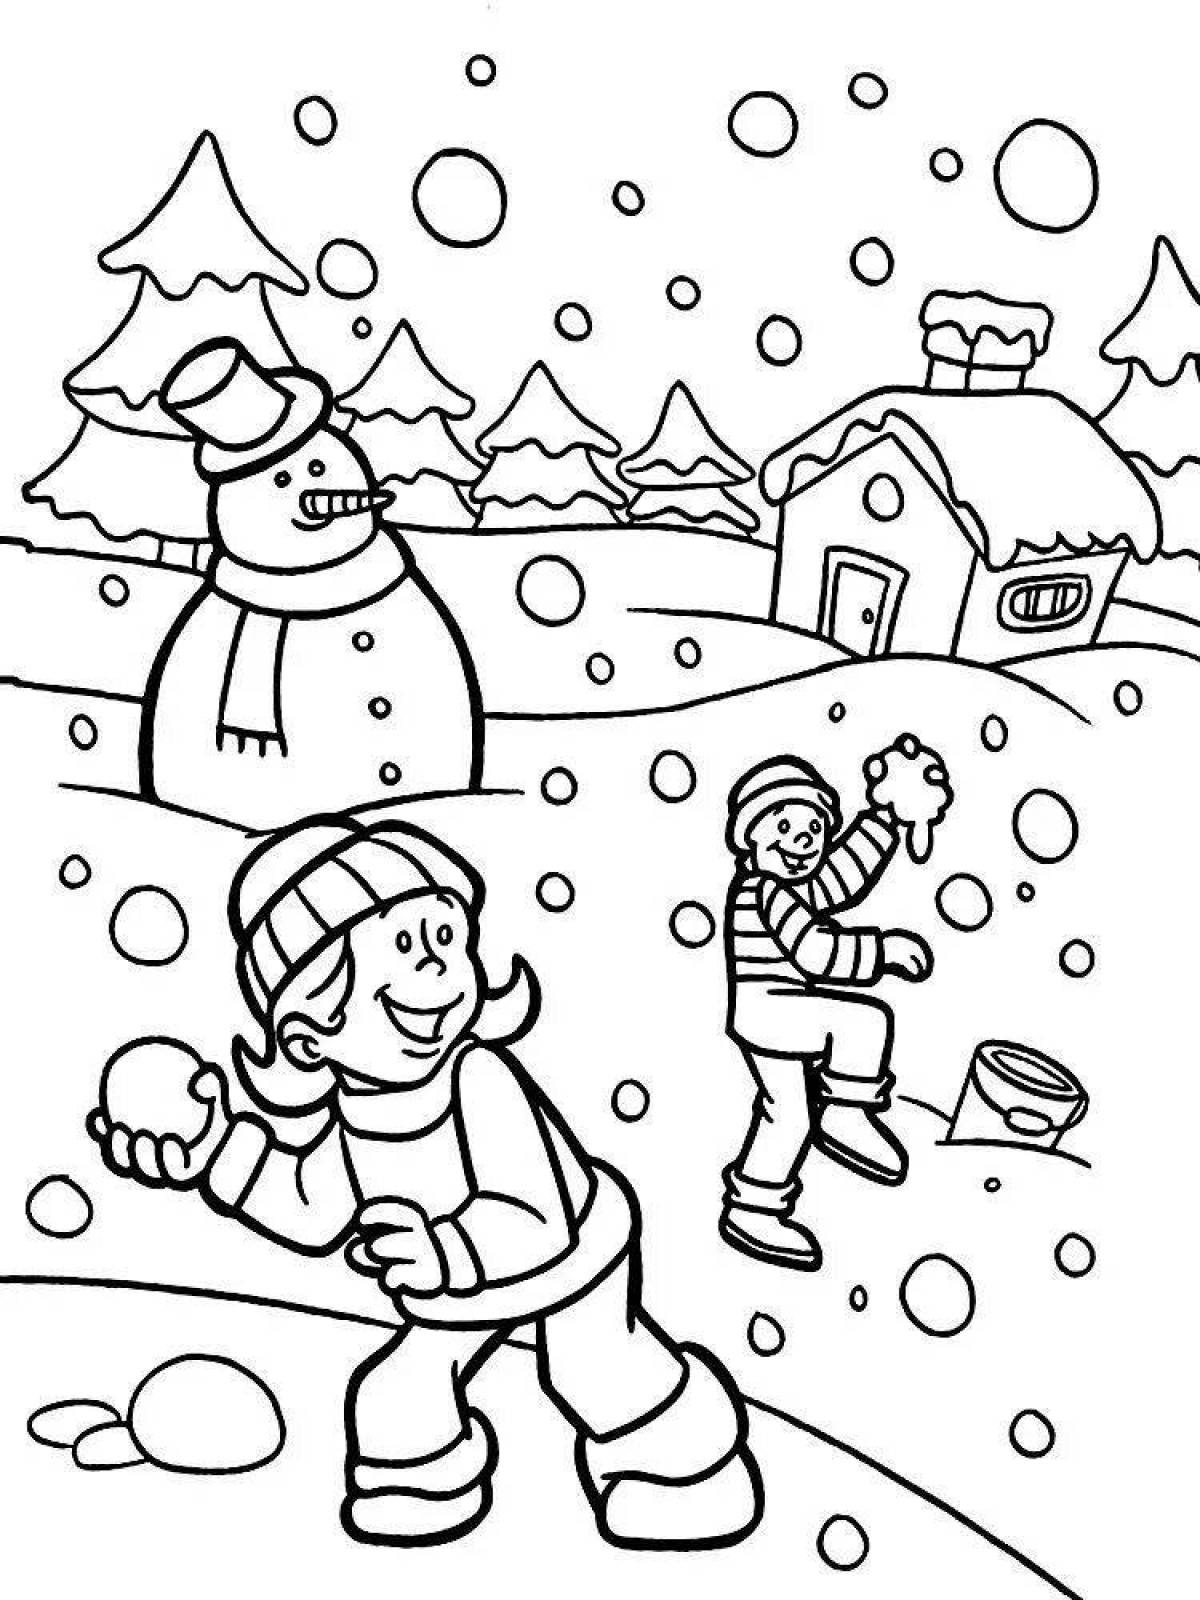 Glittering snowflake coloring page